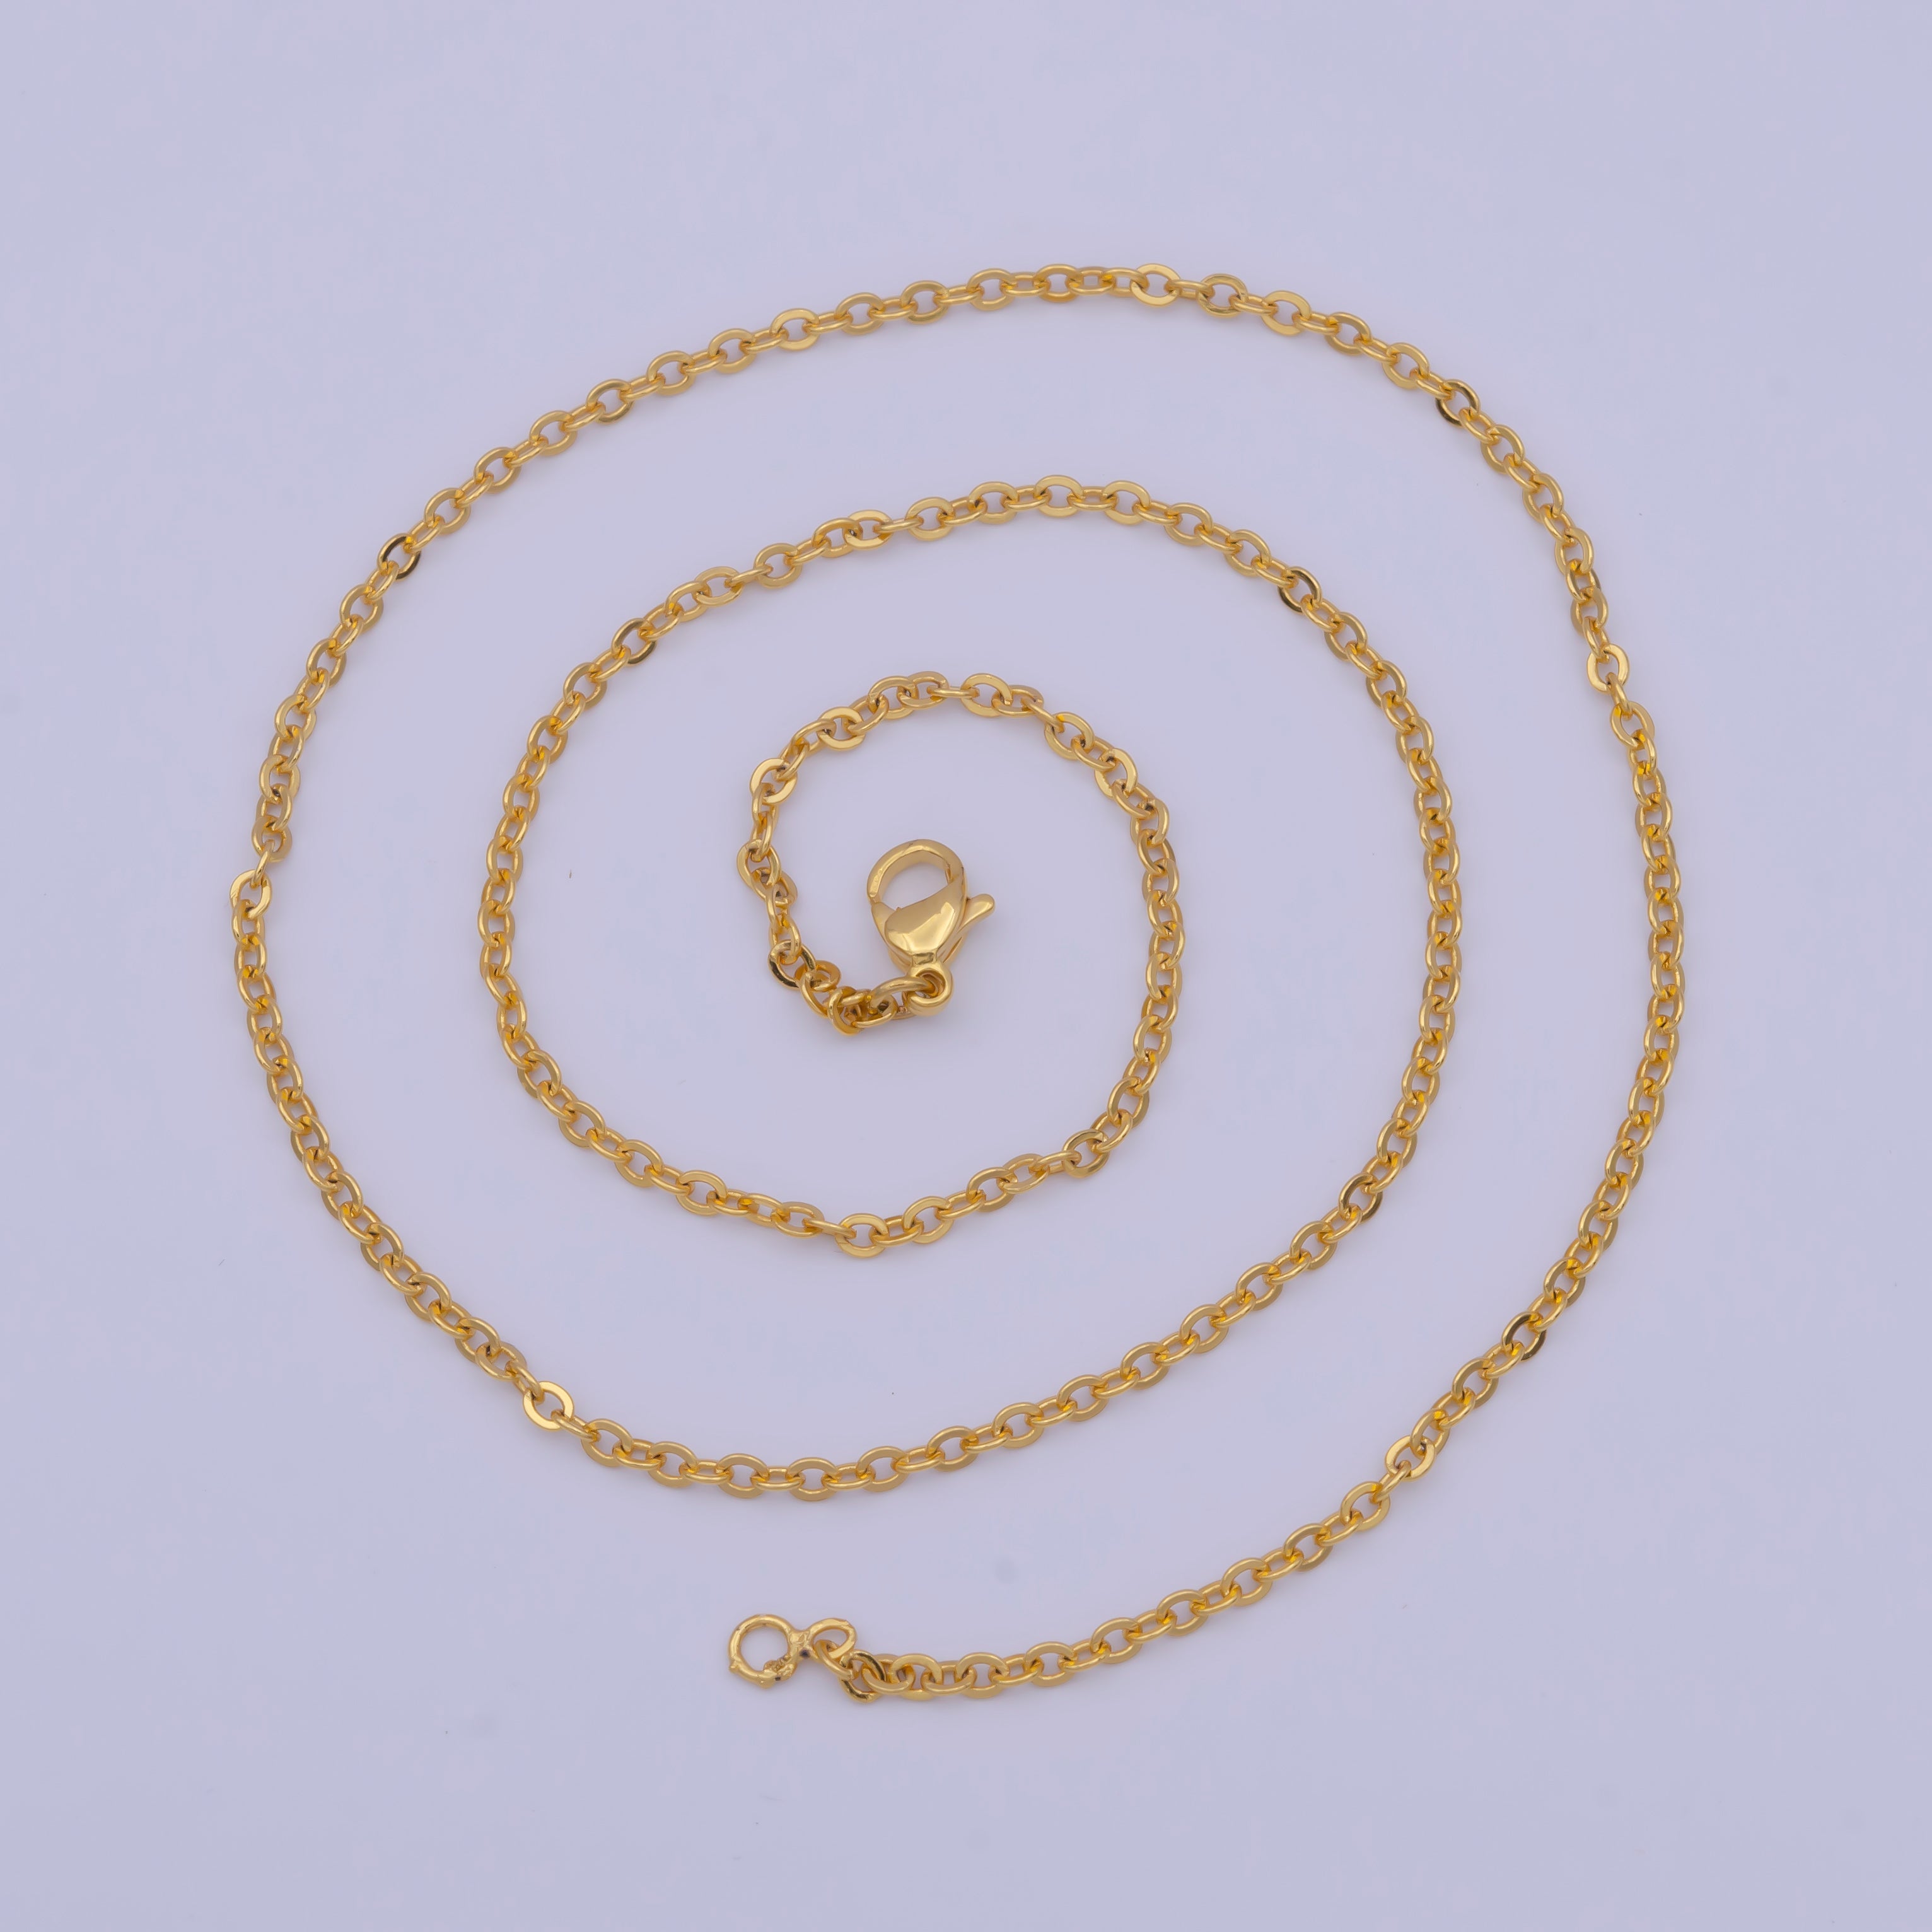 Dainty 24K Gold Filled Cable Chain Necklace Gold Link Chain Necklace Ready to Wear 17.5 Inch WA-1145 - DLUXCA